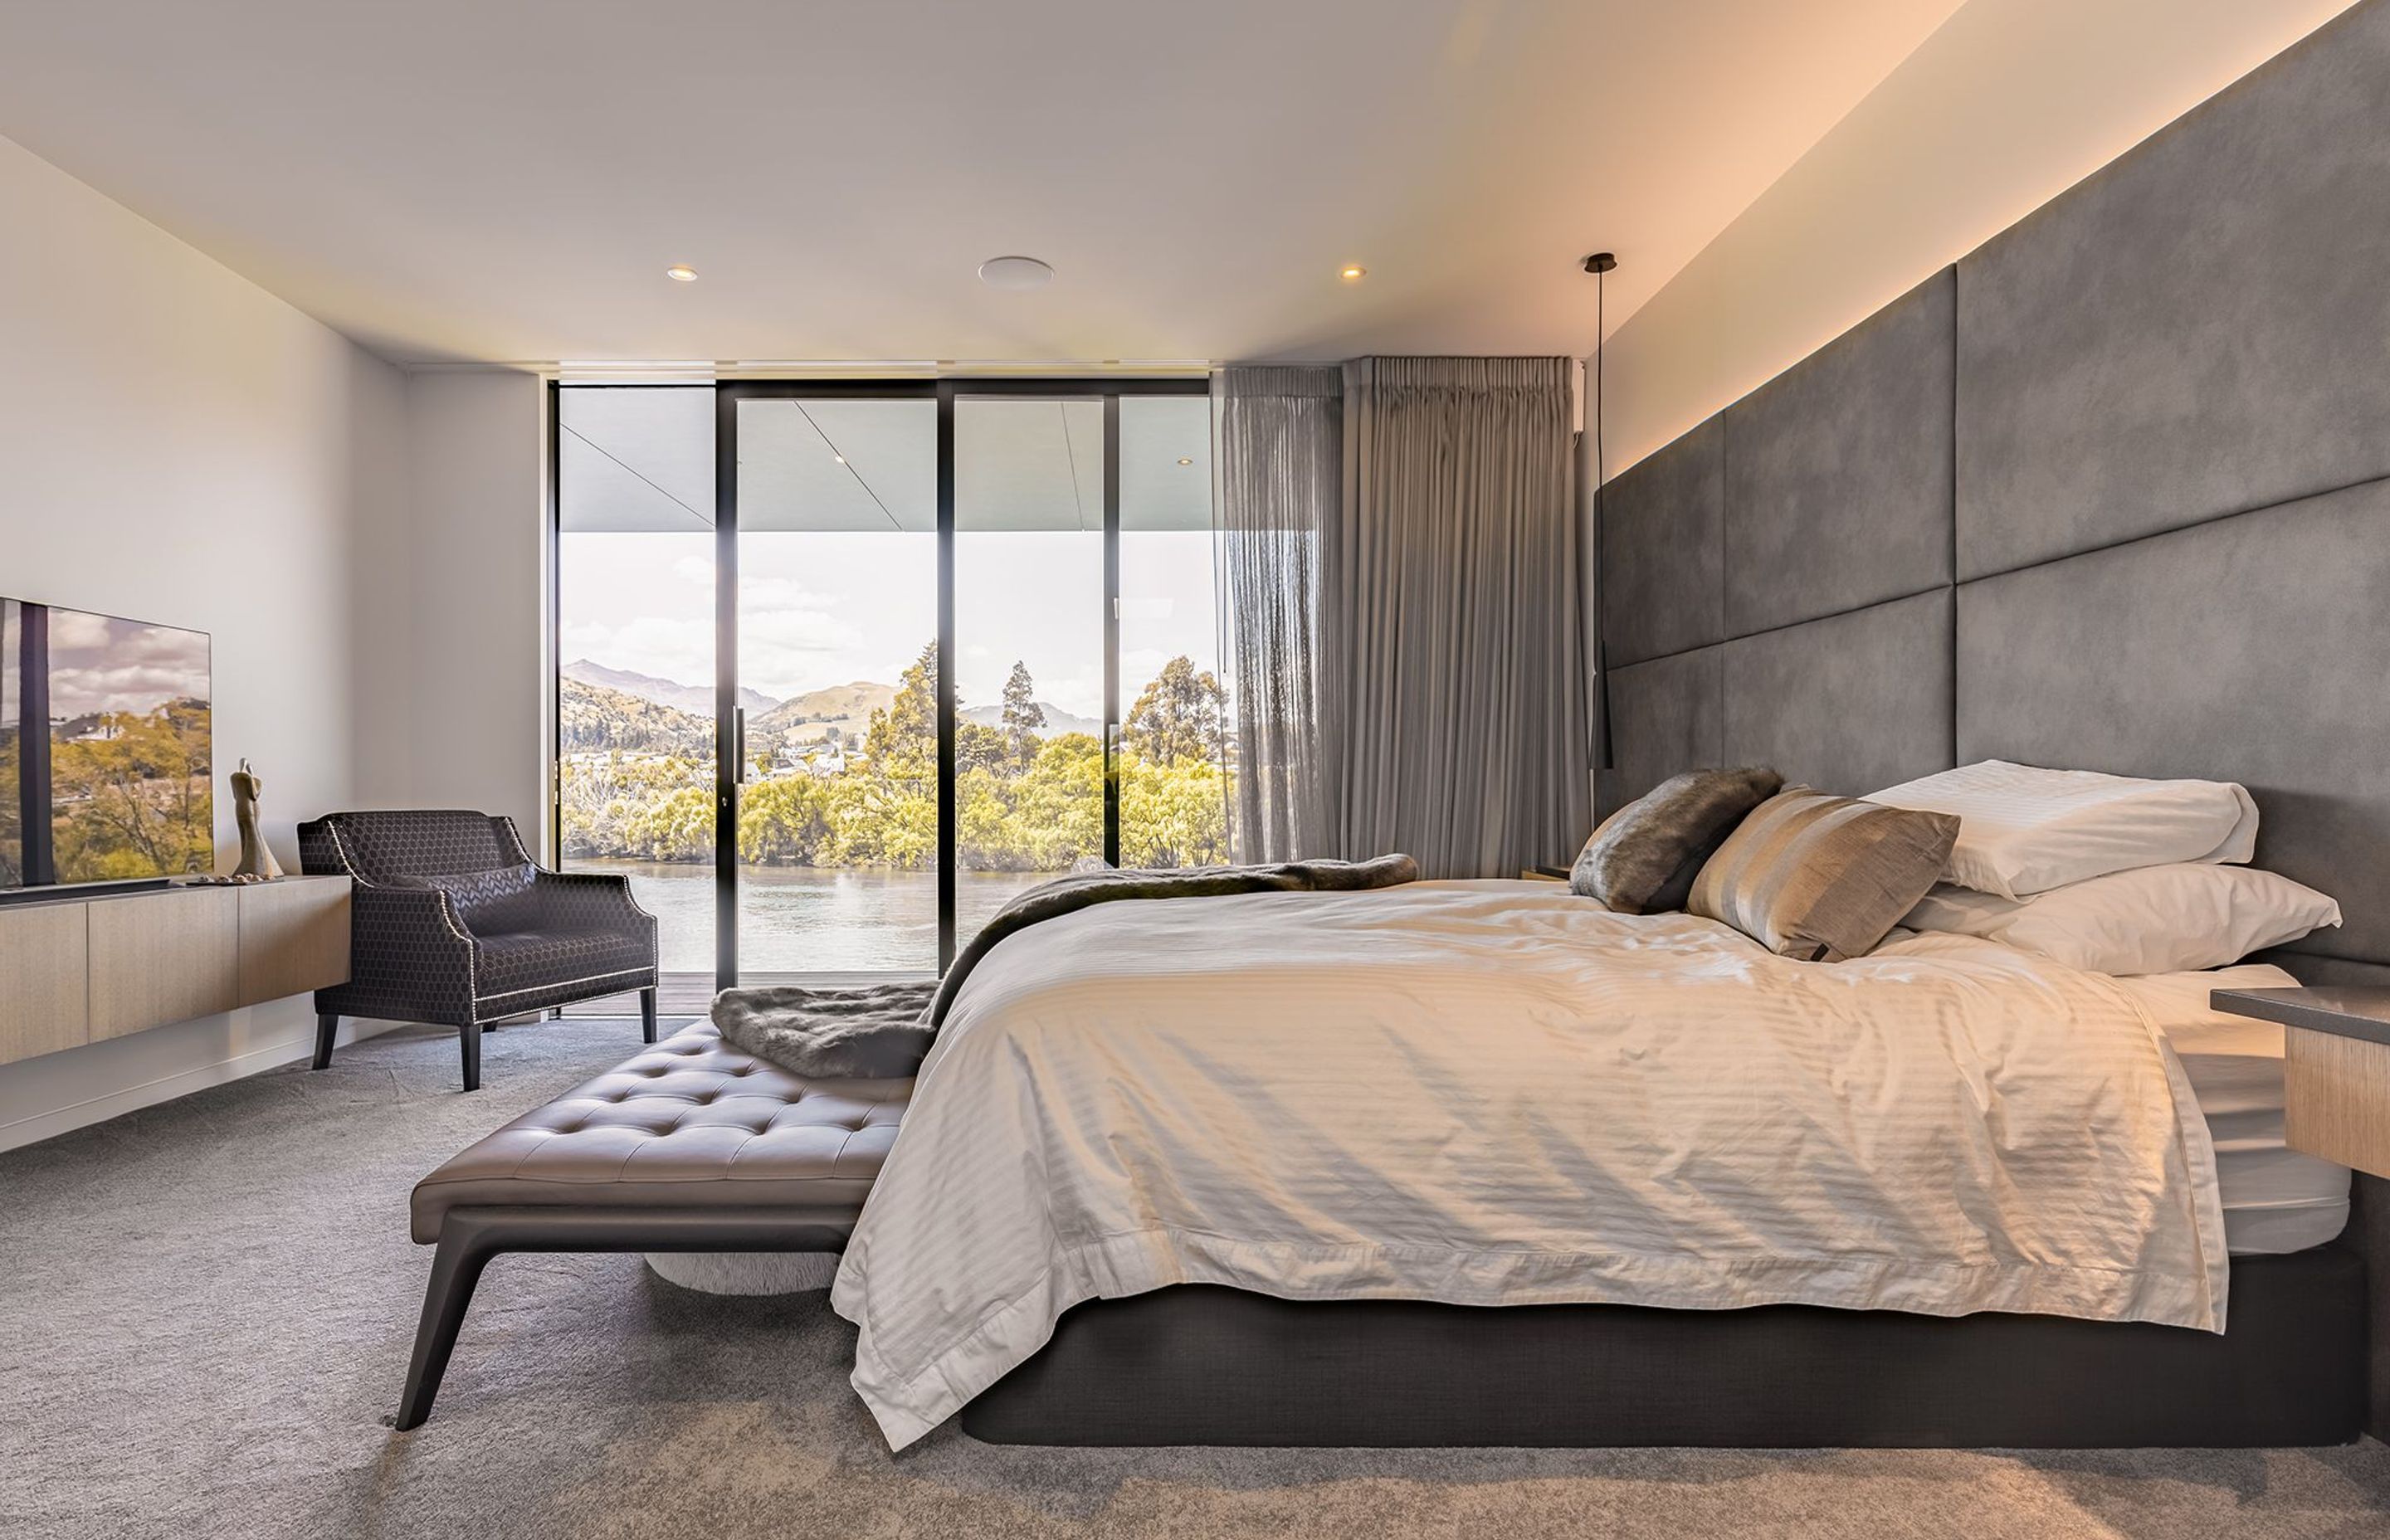 The bedroom enjoys a view right over the lake.